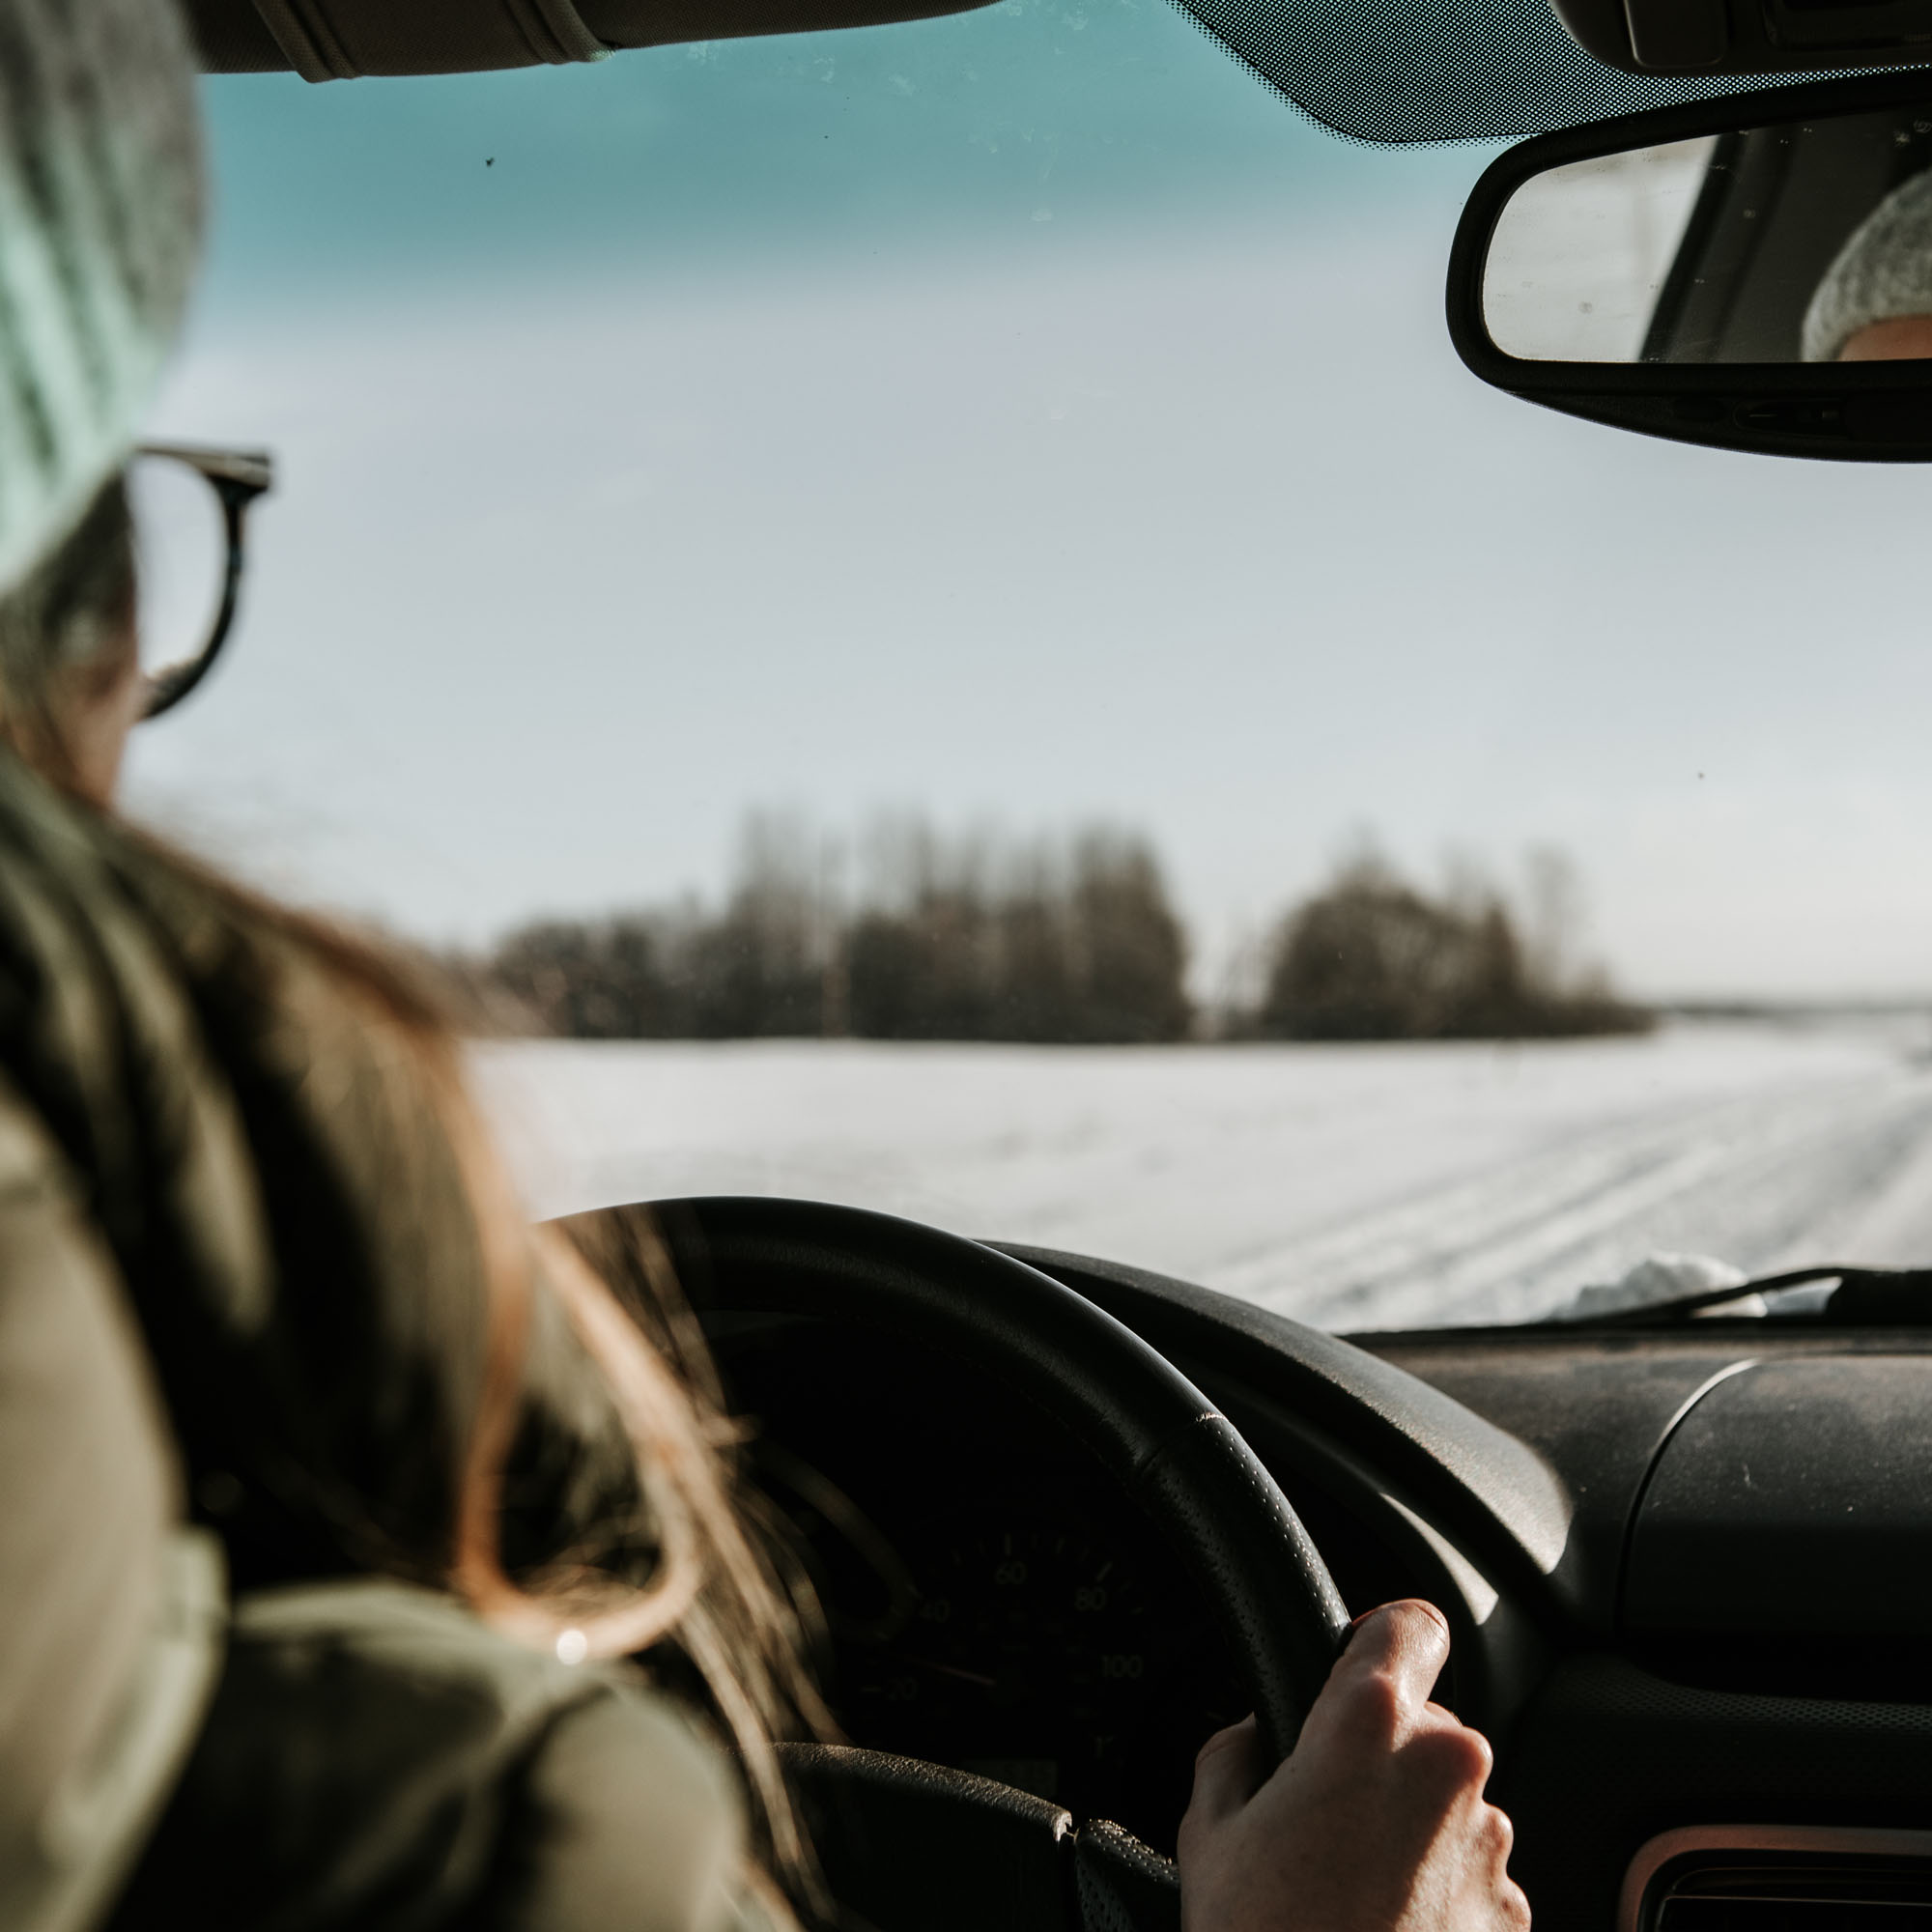 Woman driving during winter with ice and snow on the road